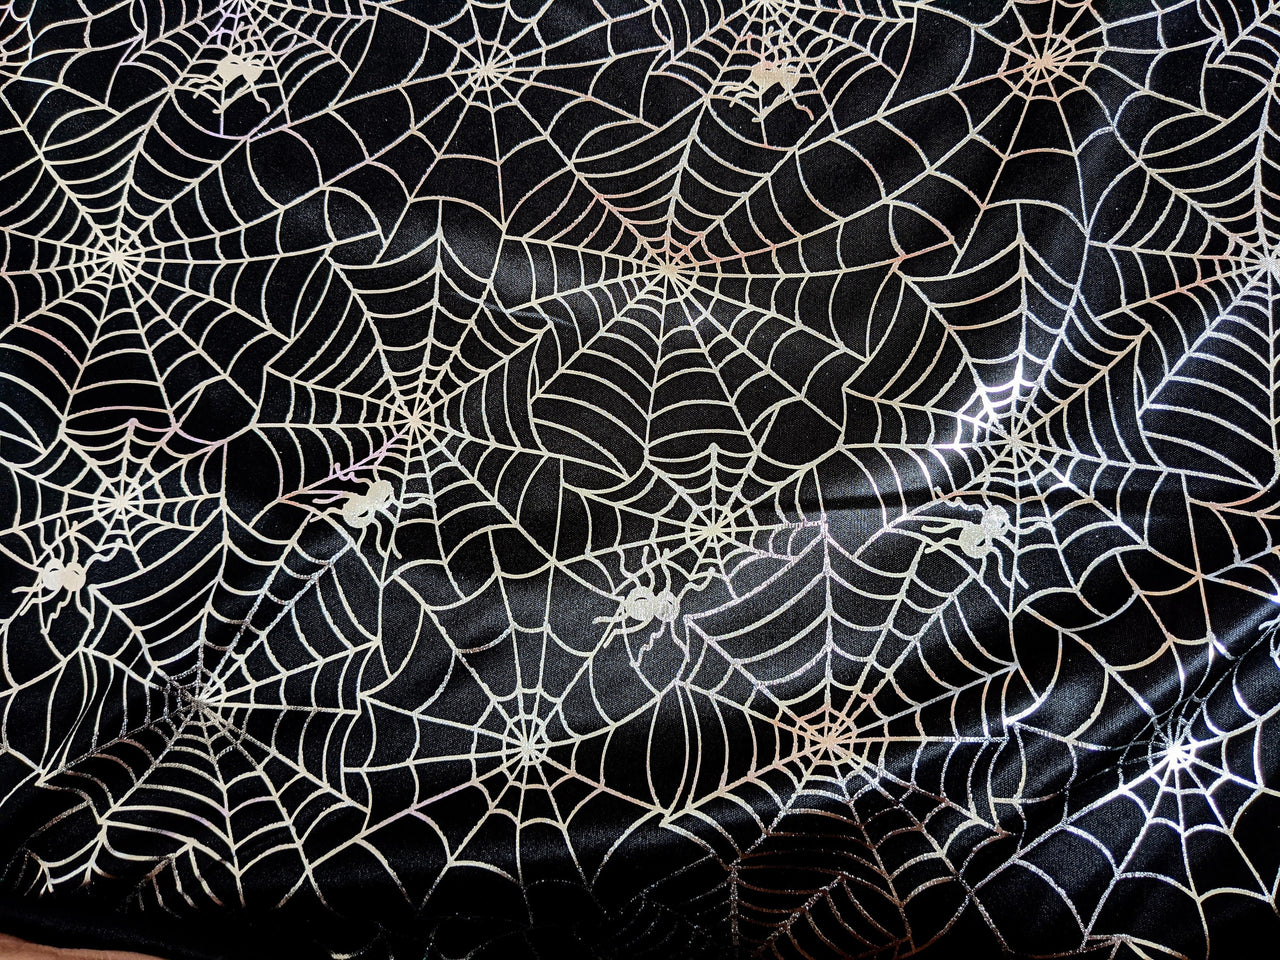 Black And Silver Halloween Spider's Web Foil Fabric, Halloween Fabric, 58 Inches Wide